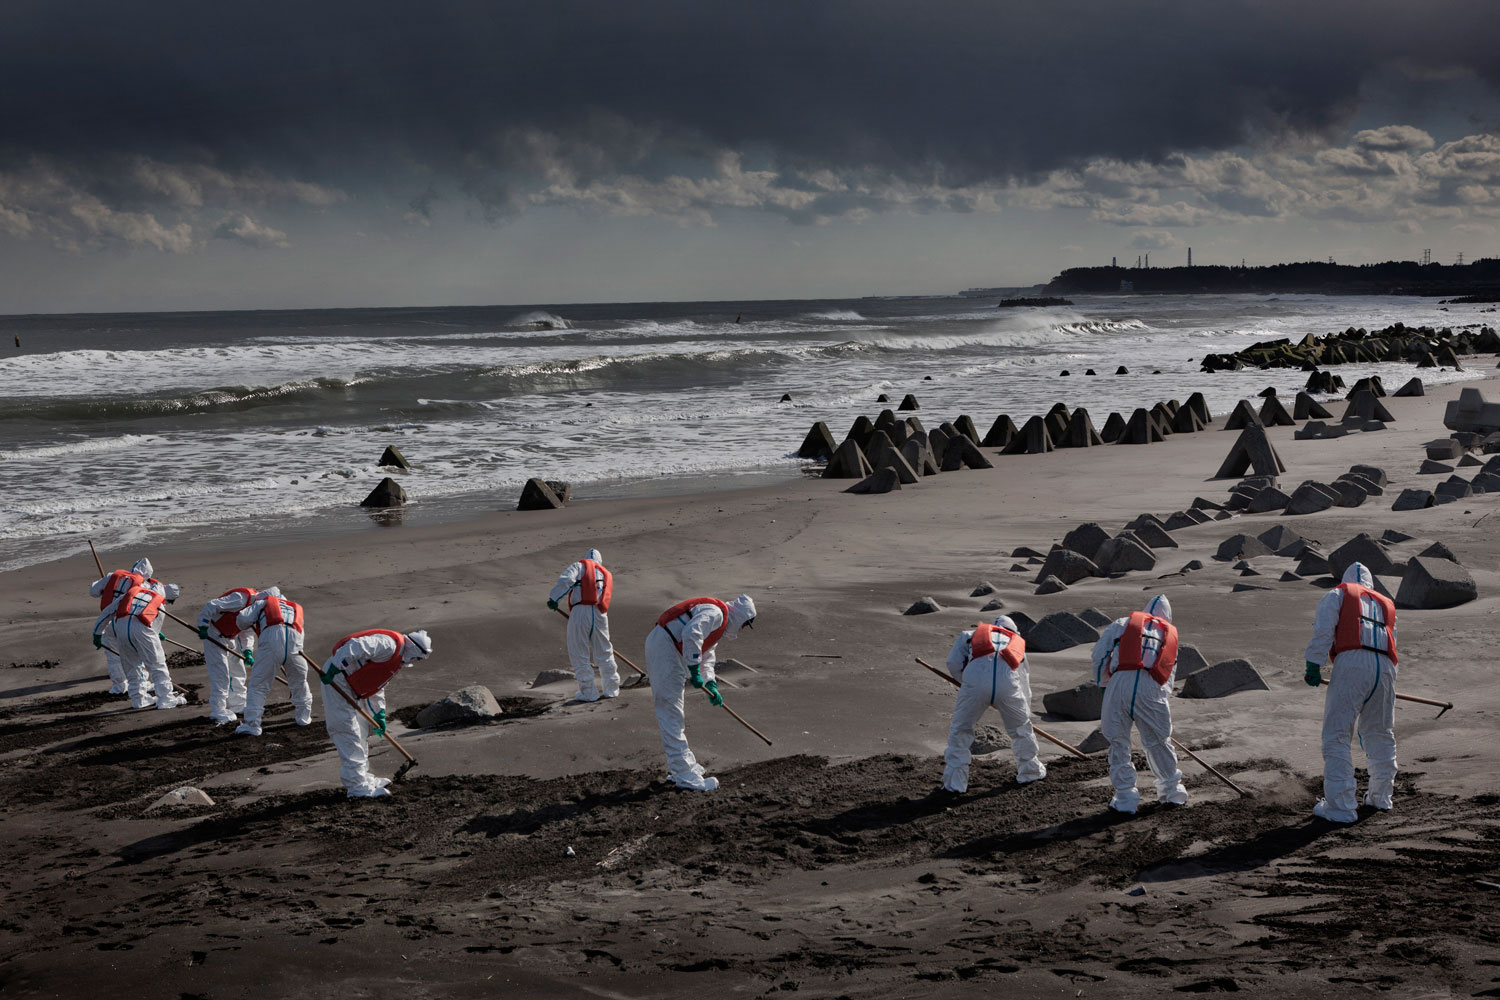 Feb. 27, 2012. Namie, Japan. Police from Futaba District Police Station, which is inside the exclusion zone, search for the dead and still-missing along the ocean front near the power plant, the stacks of which can be seen in the far distance.